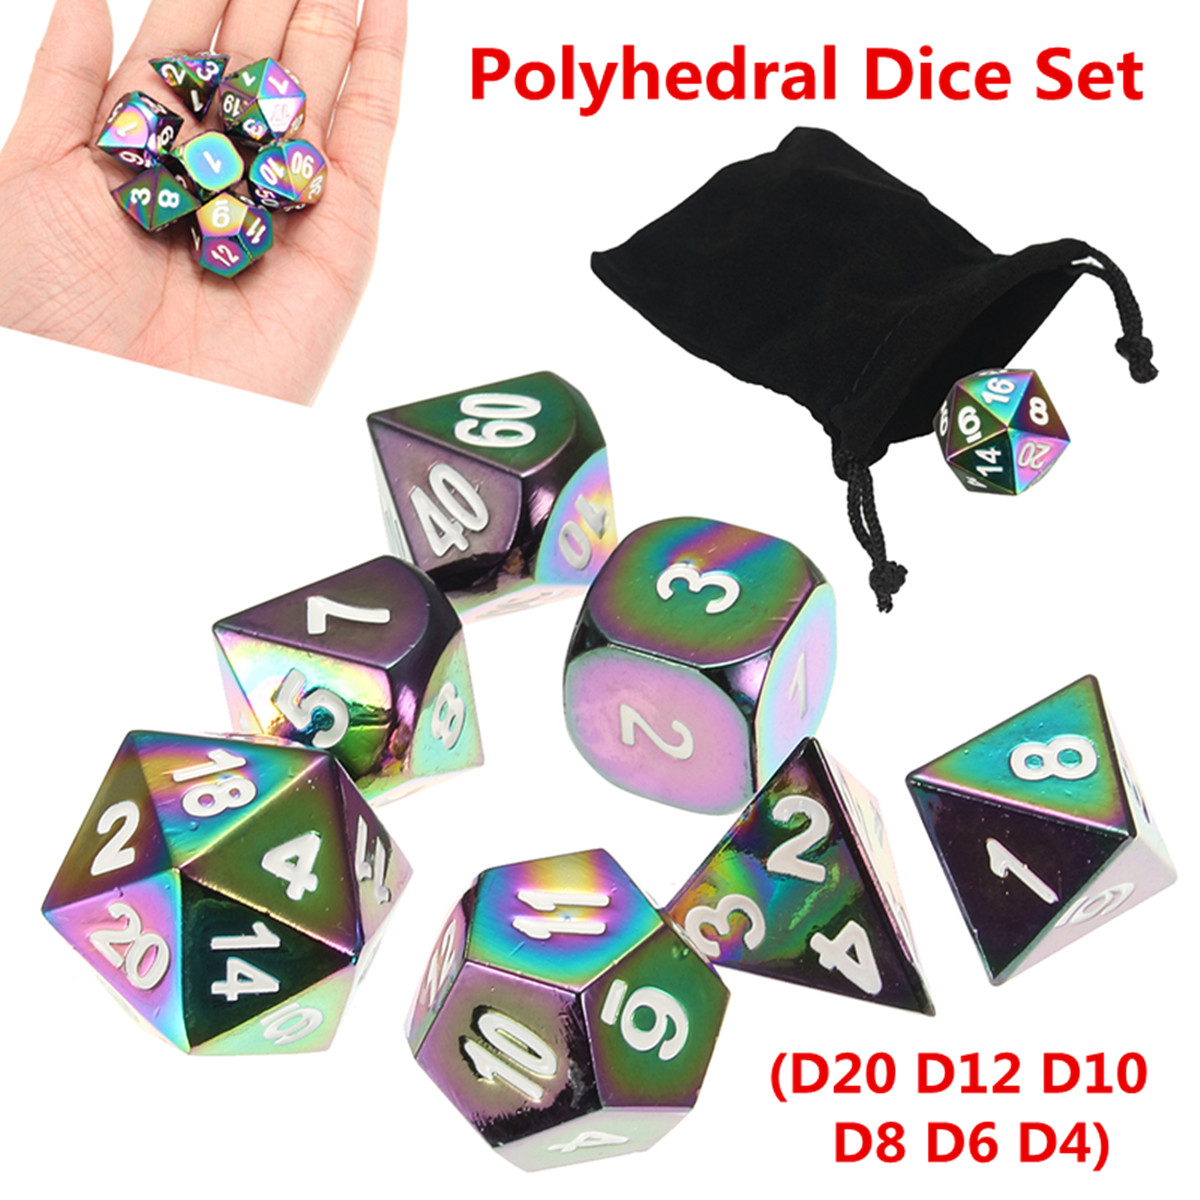 7Pcs-Colorful-Zinc-Alloy-Polyhedral-Dice-Set-Board-Game-Multisided-Dices-Gadget-1241484-2